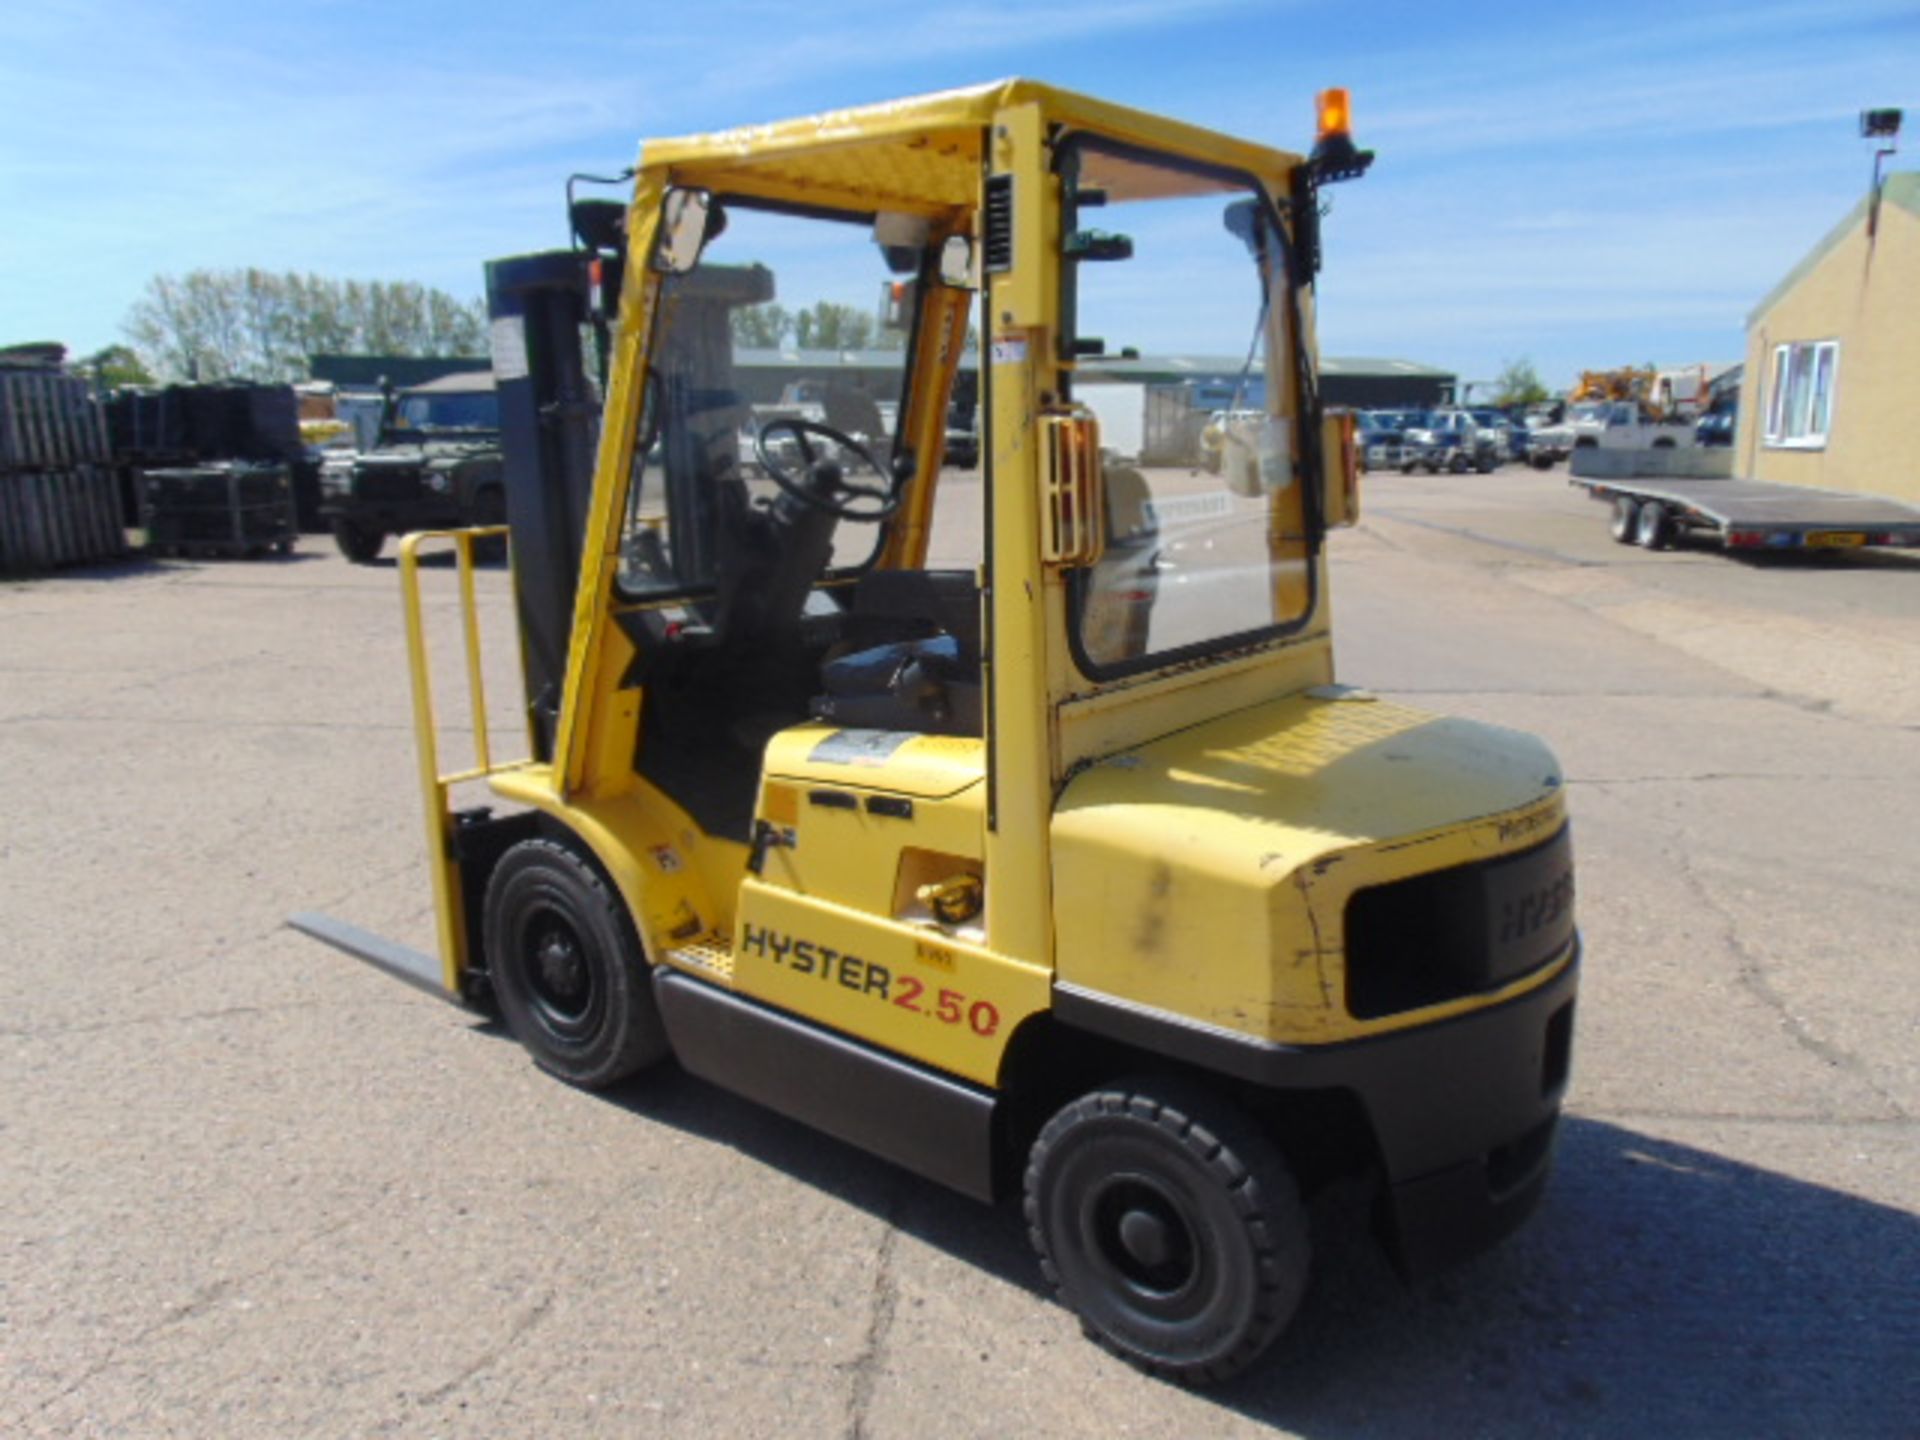 Hyster 2.50 Class C, Zone 2 Protected Diesel Forklift ONLY 763.4 hours!! - Bild 6 aus 29